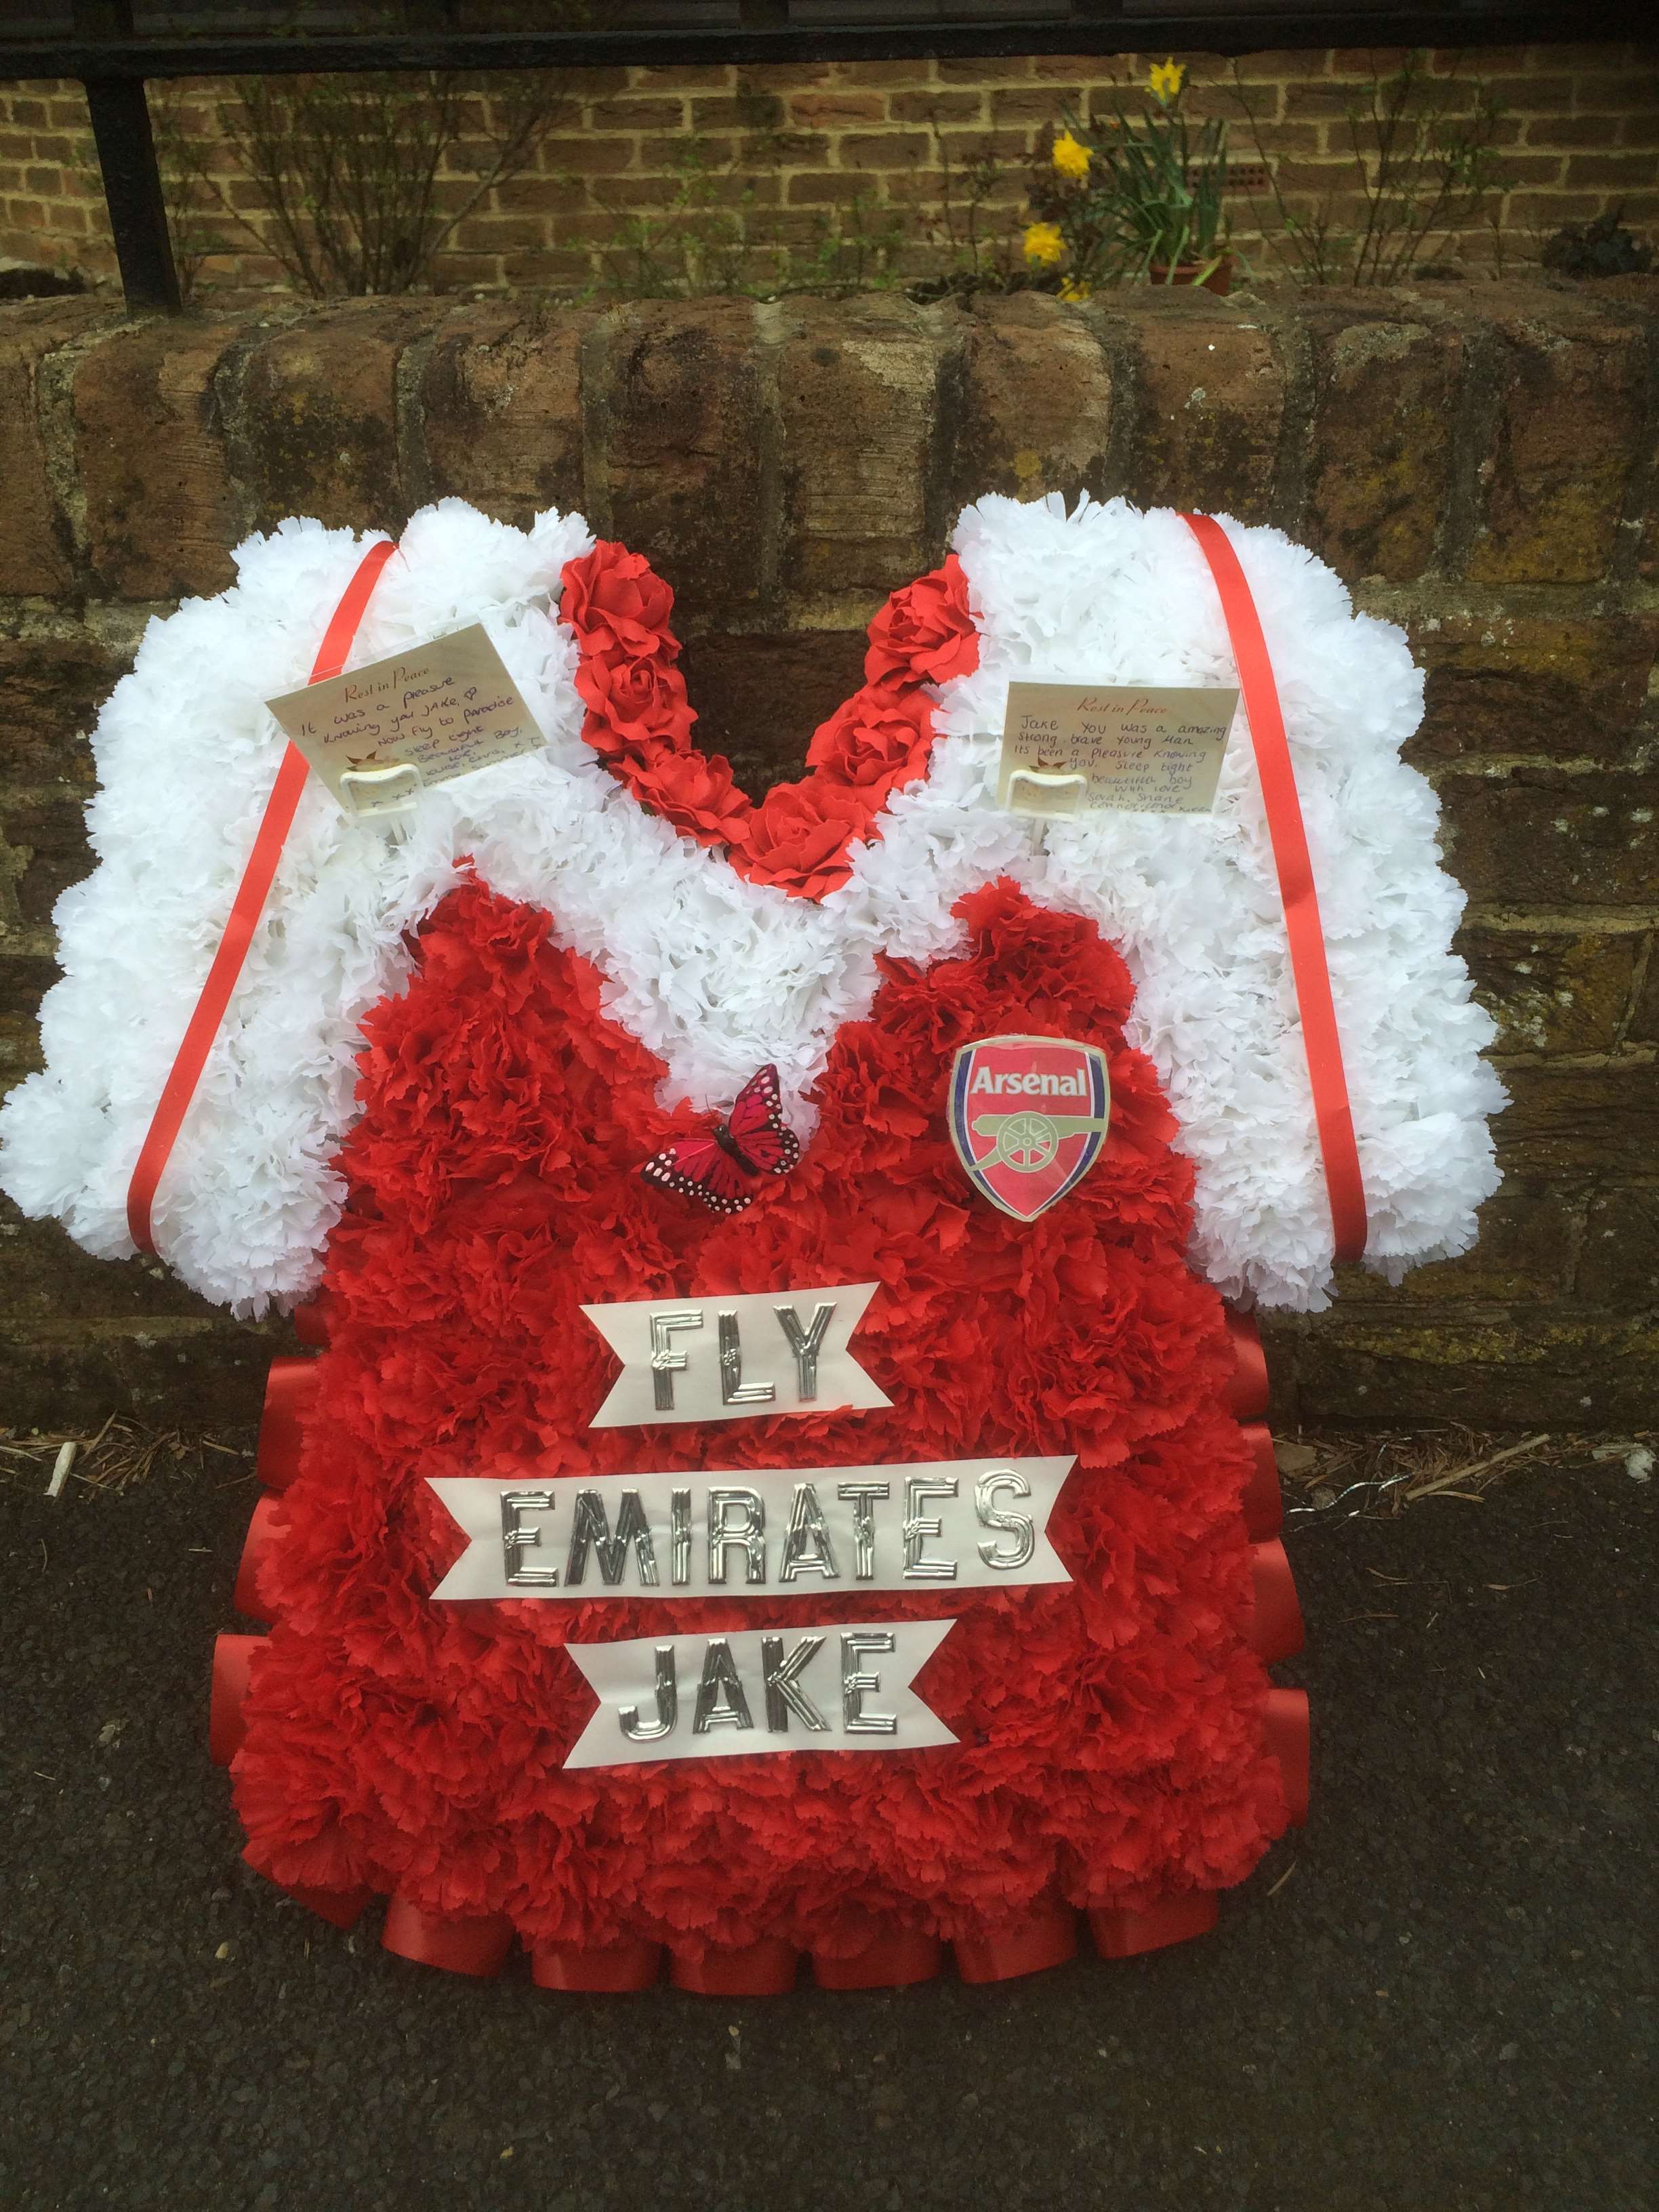 Floral tributes reflected Jake's love of the Gunners